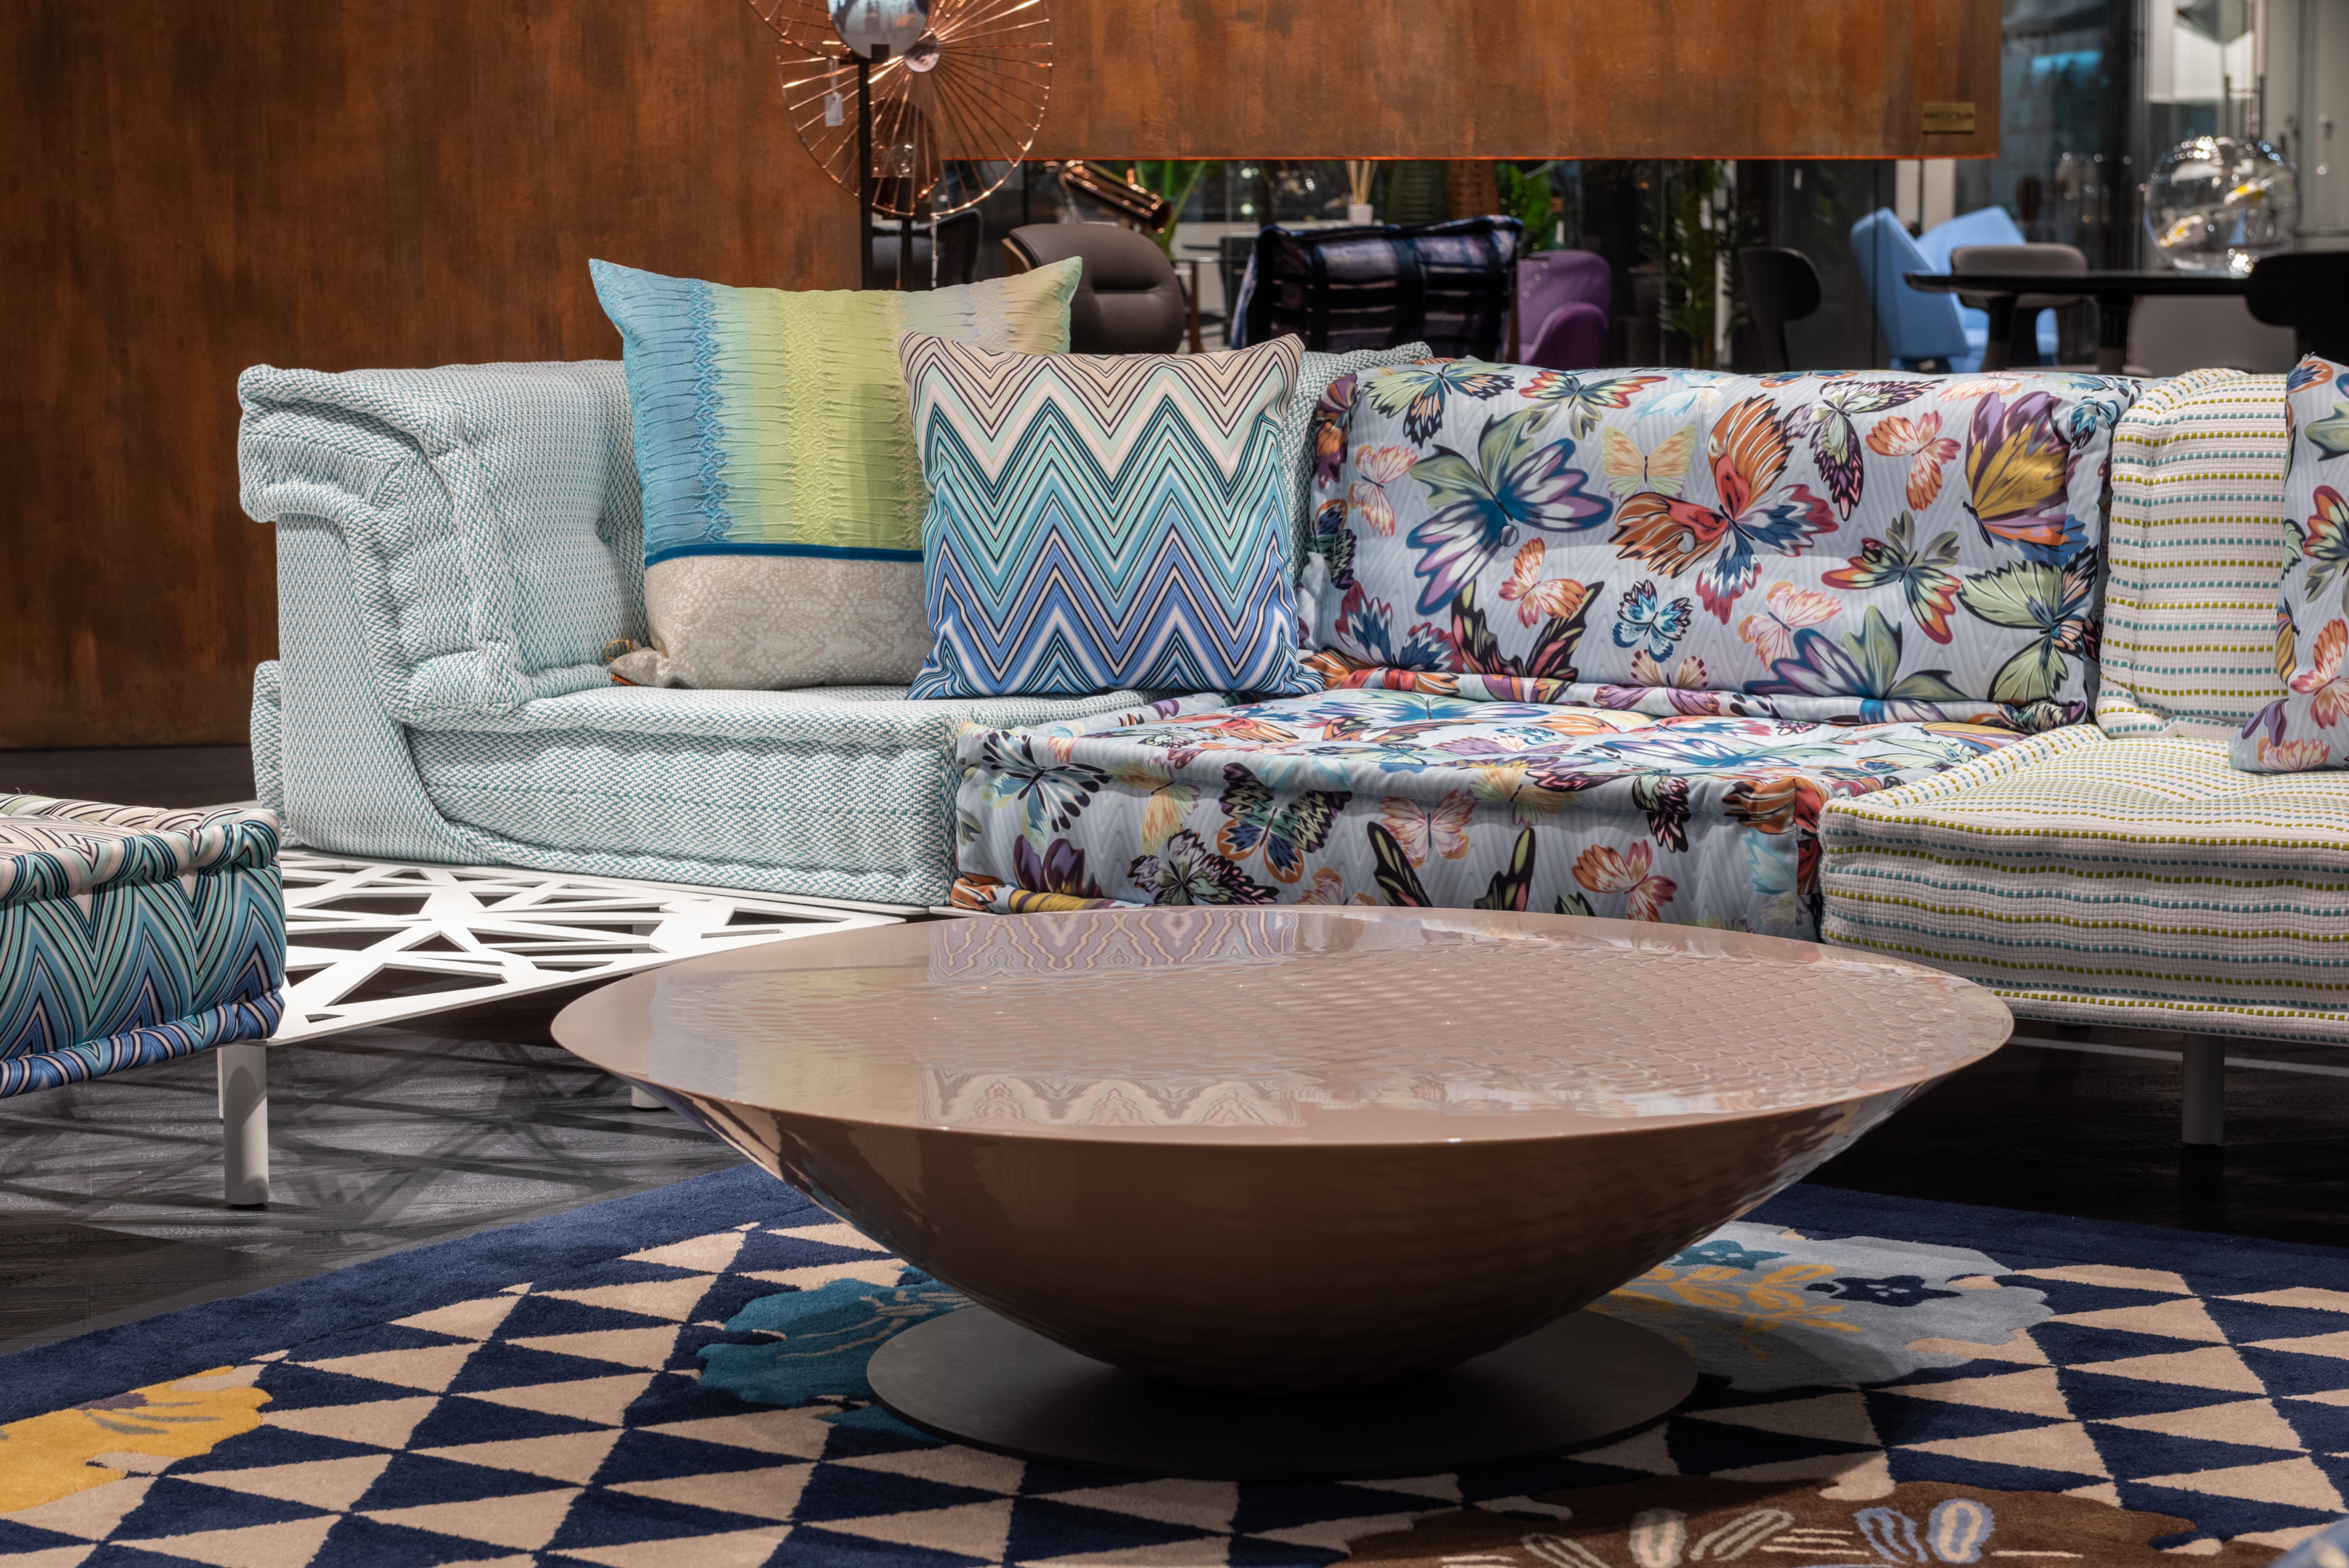 sofa with different patterned prints and round coffee table